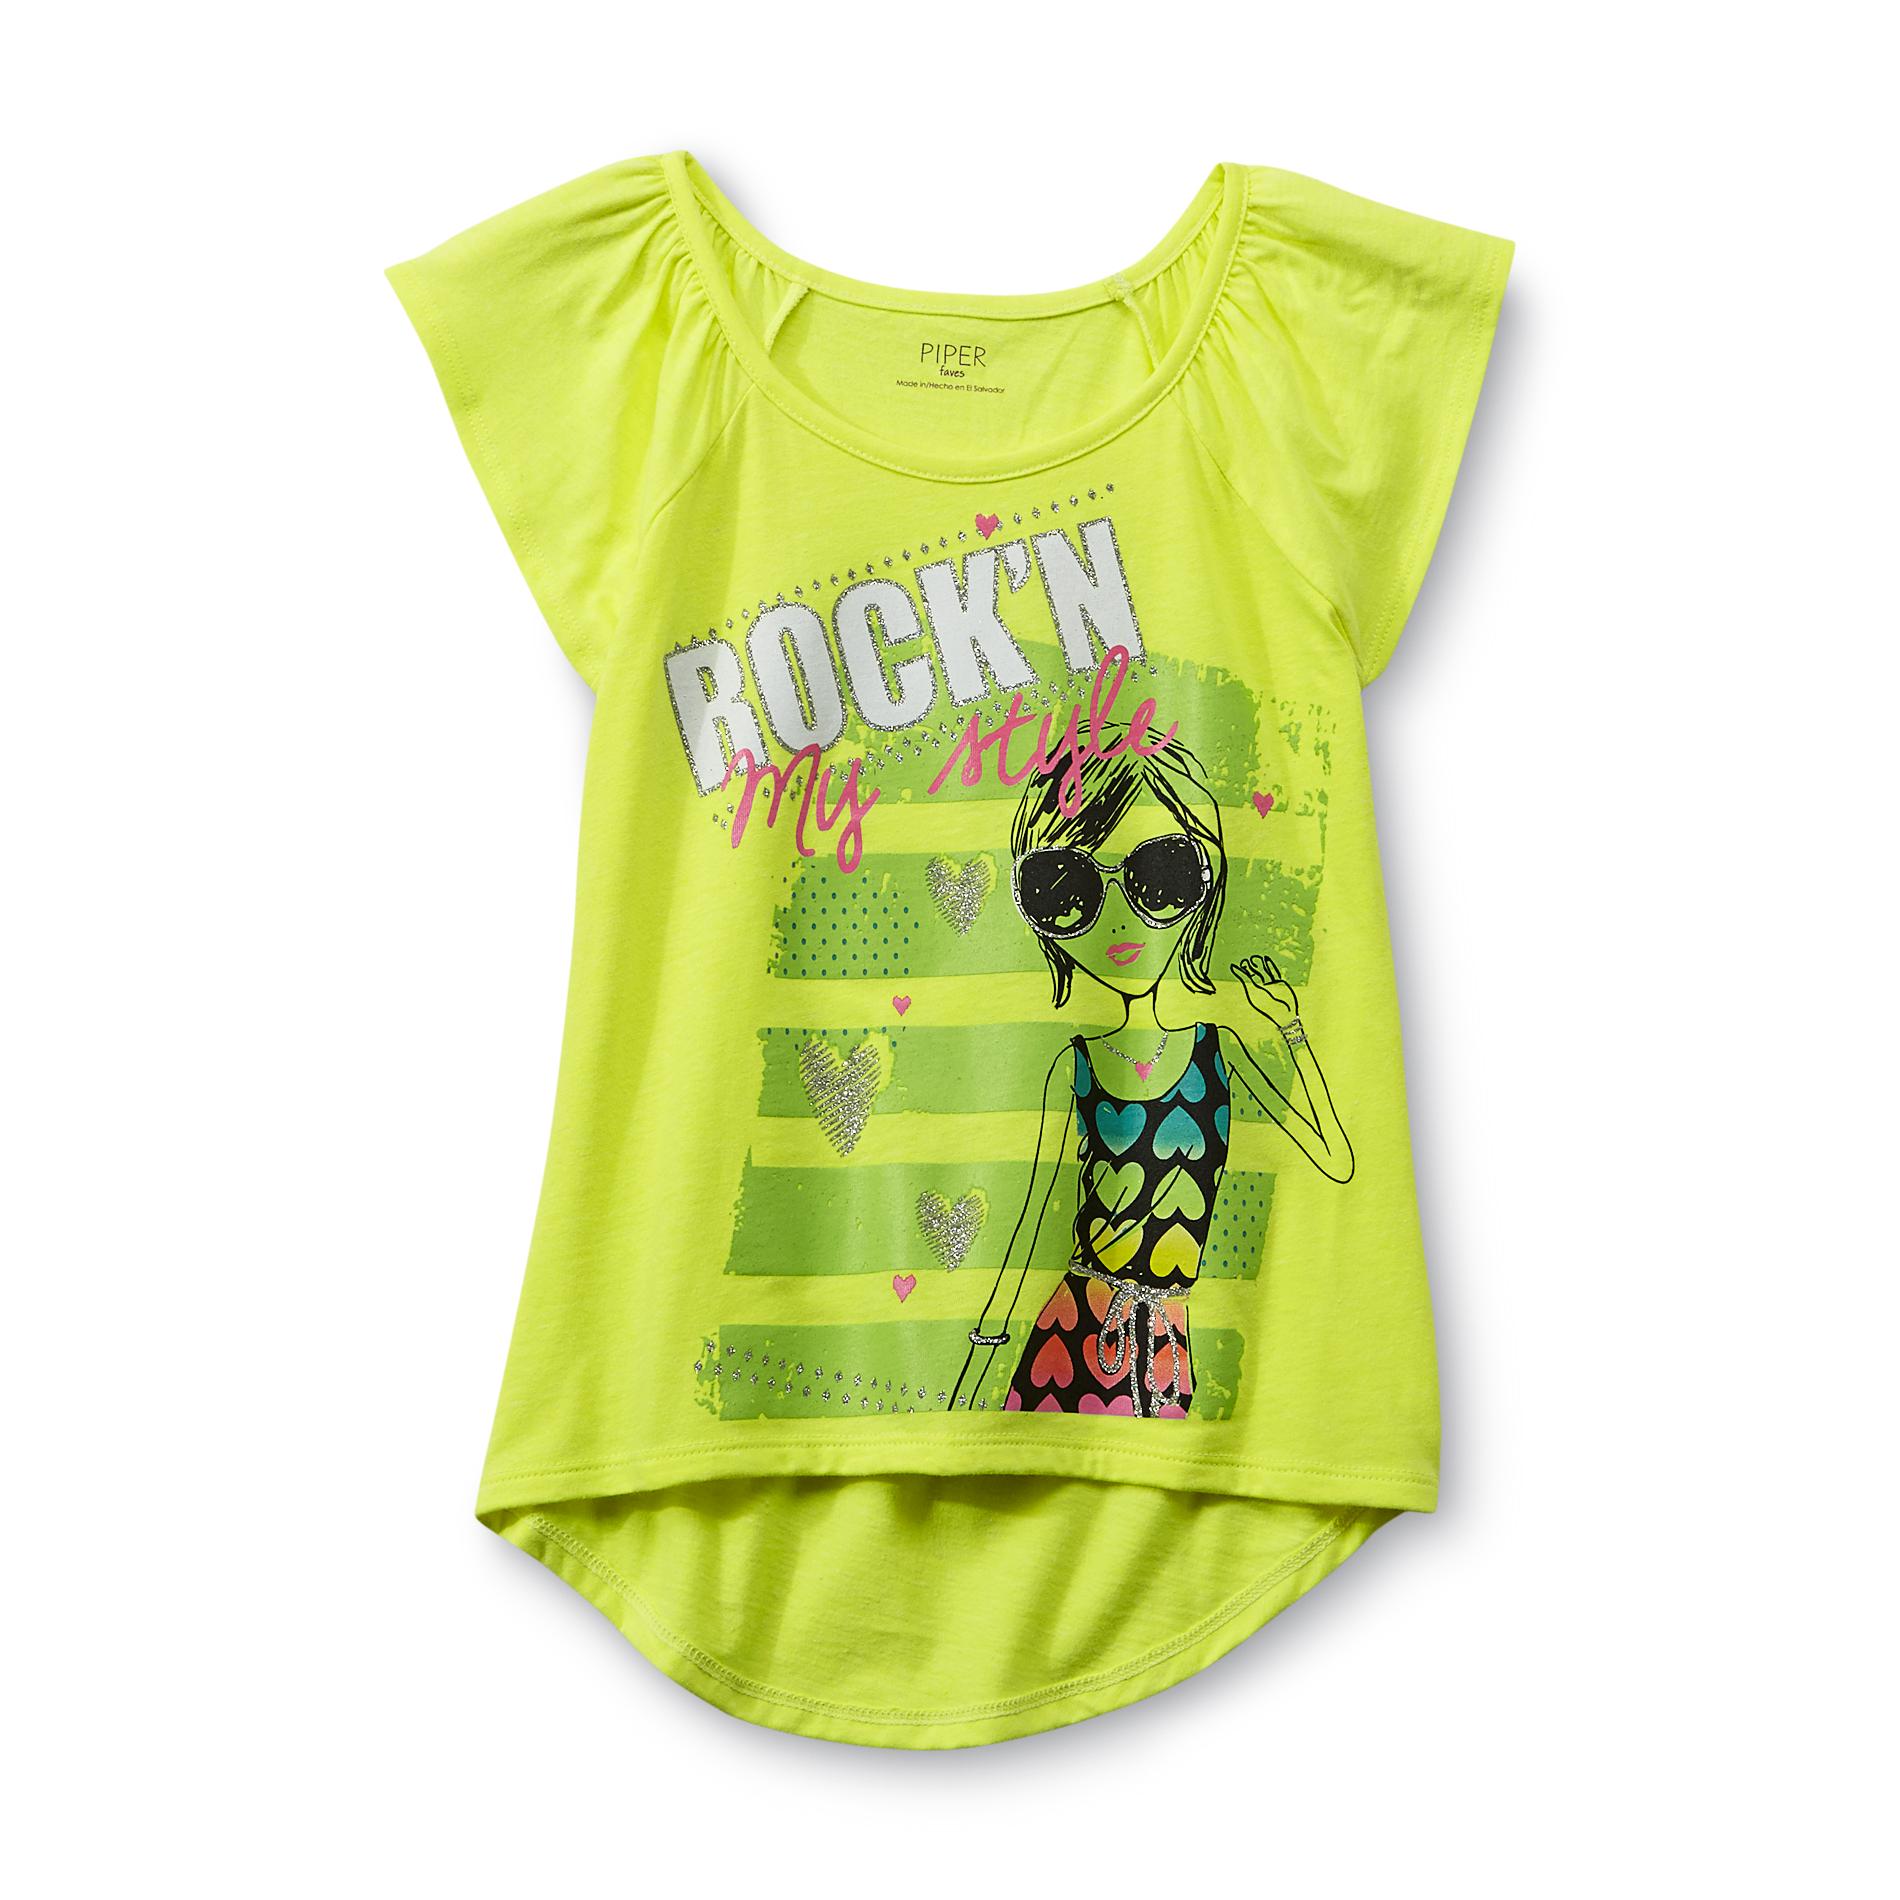 Piper Girl's High-Low Graphic T-Shirt - My Style